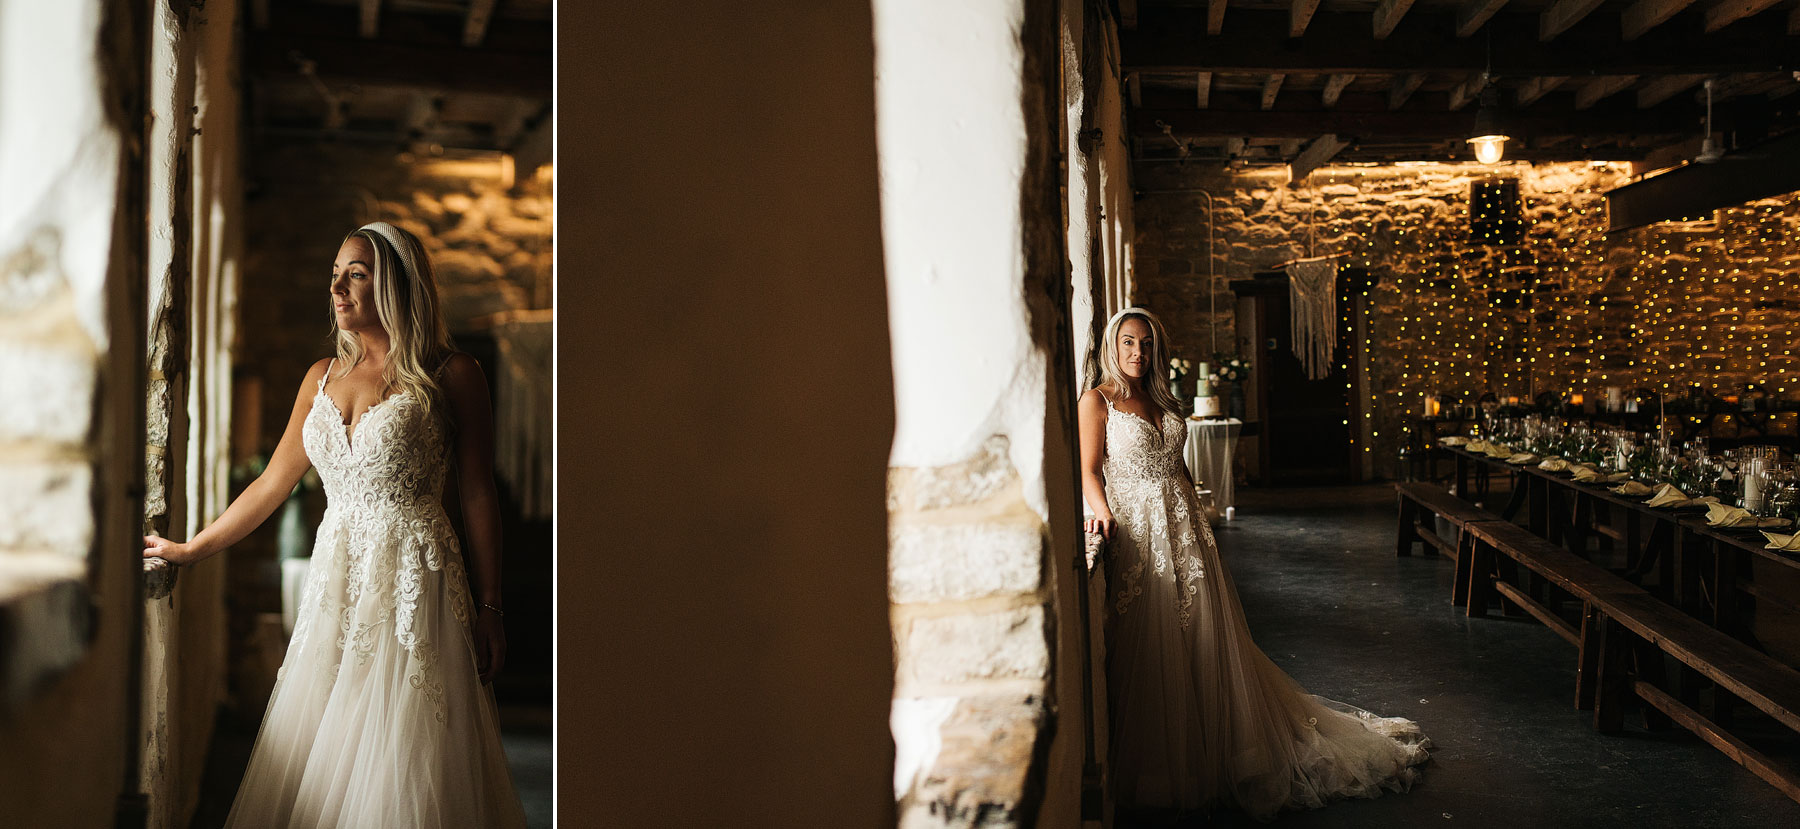 bride in beautiful light at ponden mill